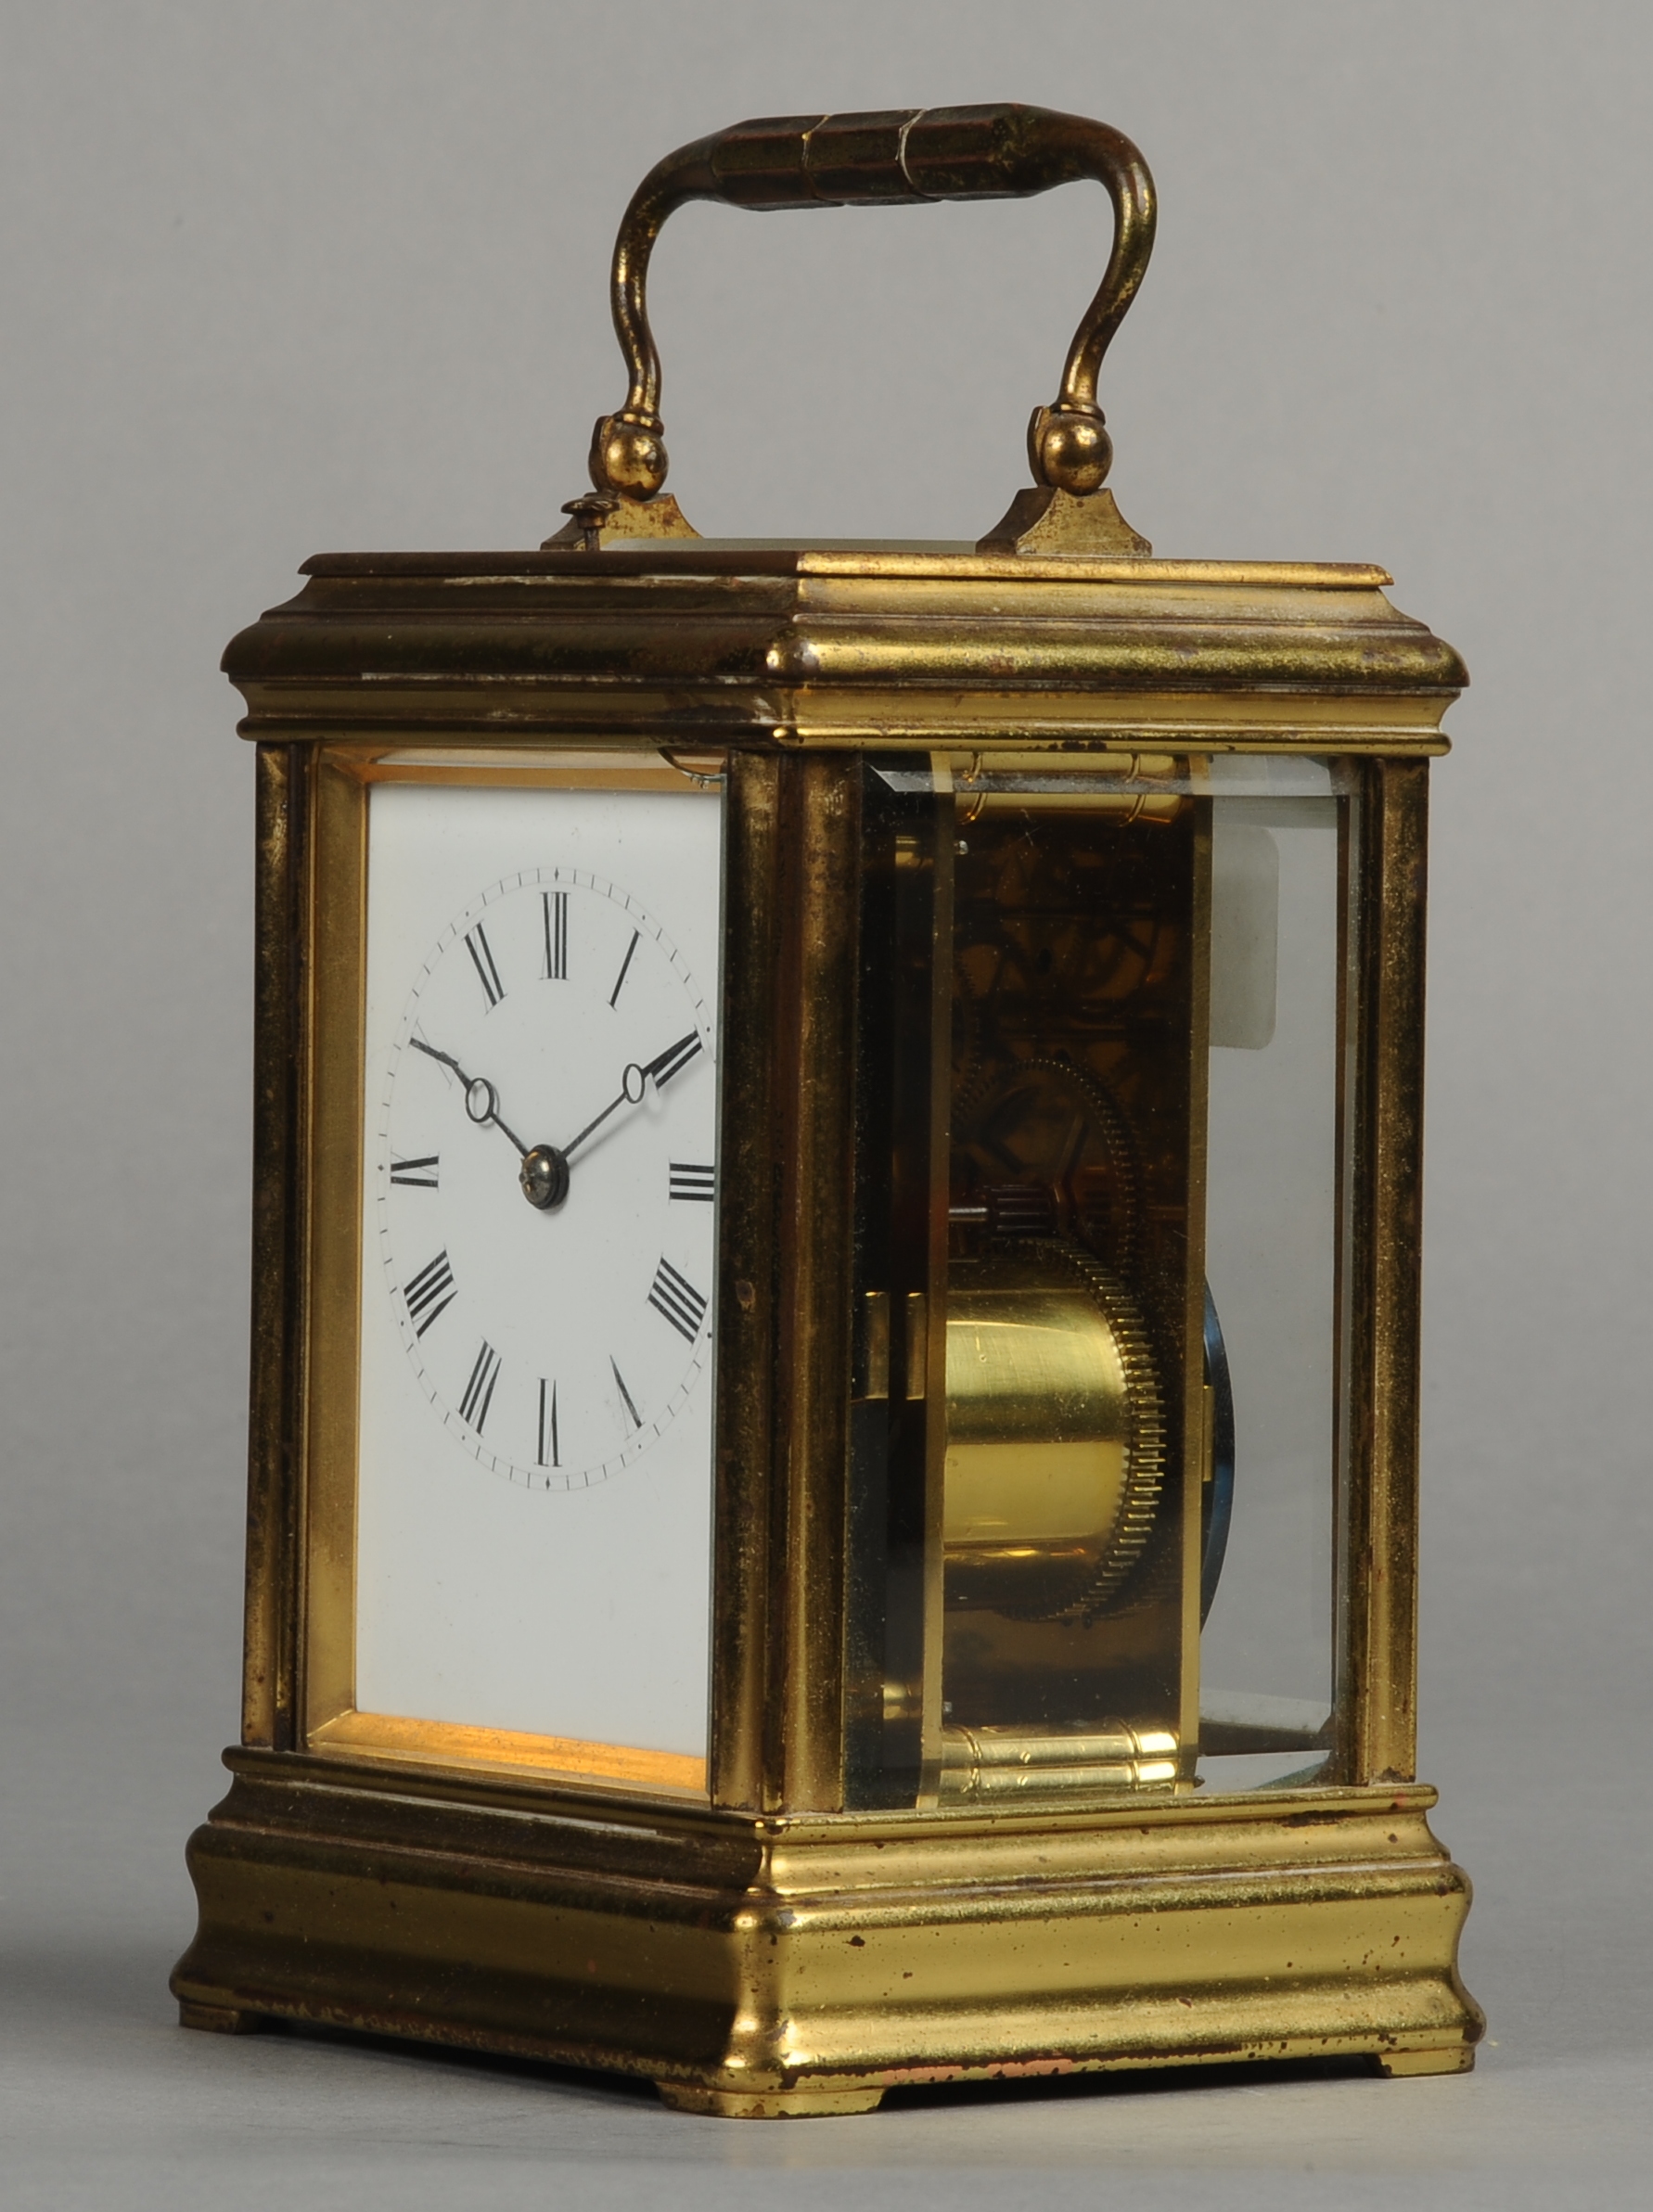 A LATE 19TH CENTURY FRENCH TWO TRAIN CARRIAGE CLOCK WITH ALARUM MOVEMENT, - Image 2 of 8